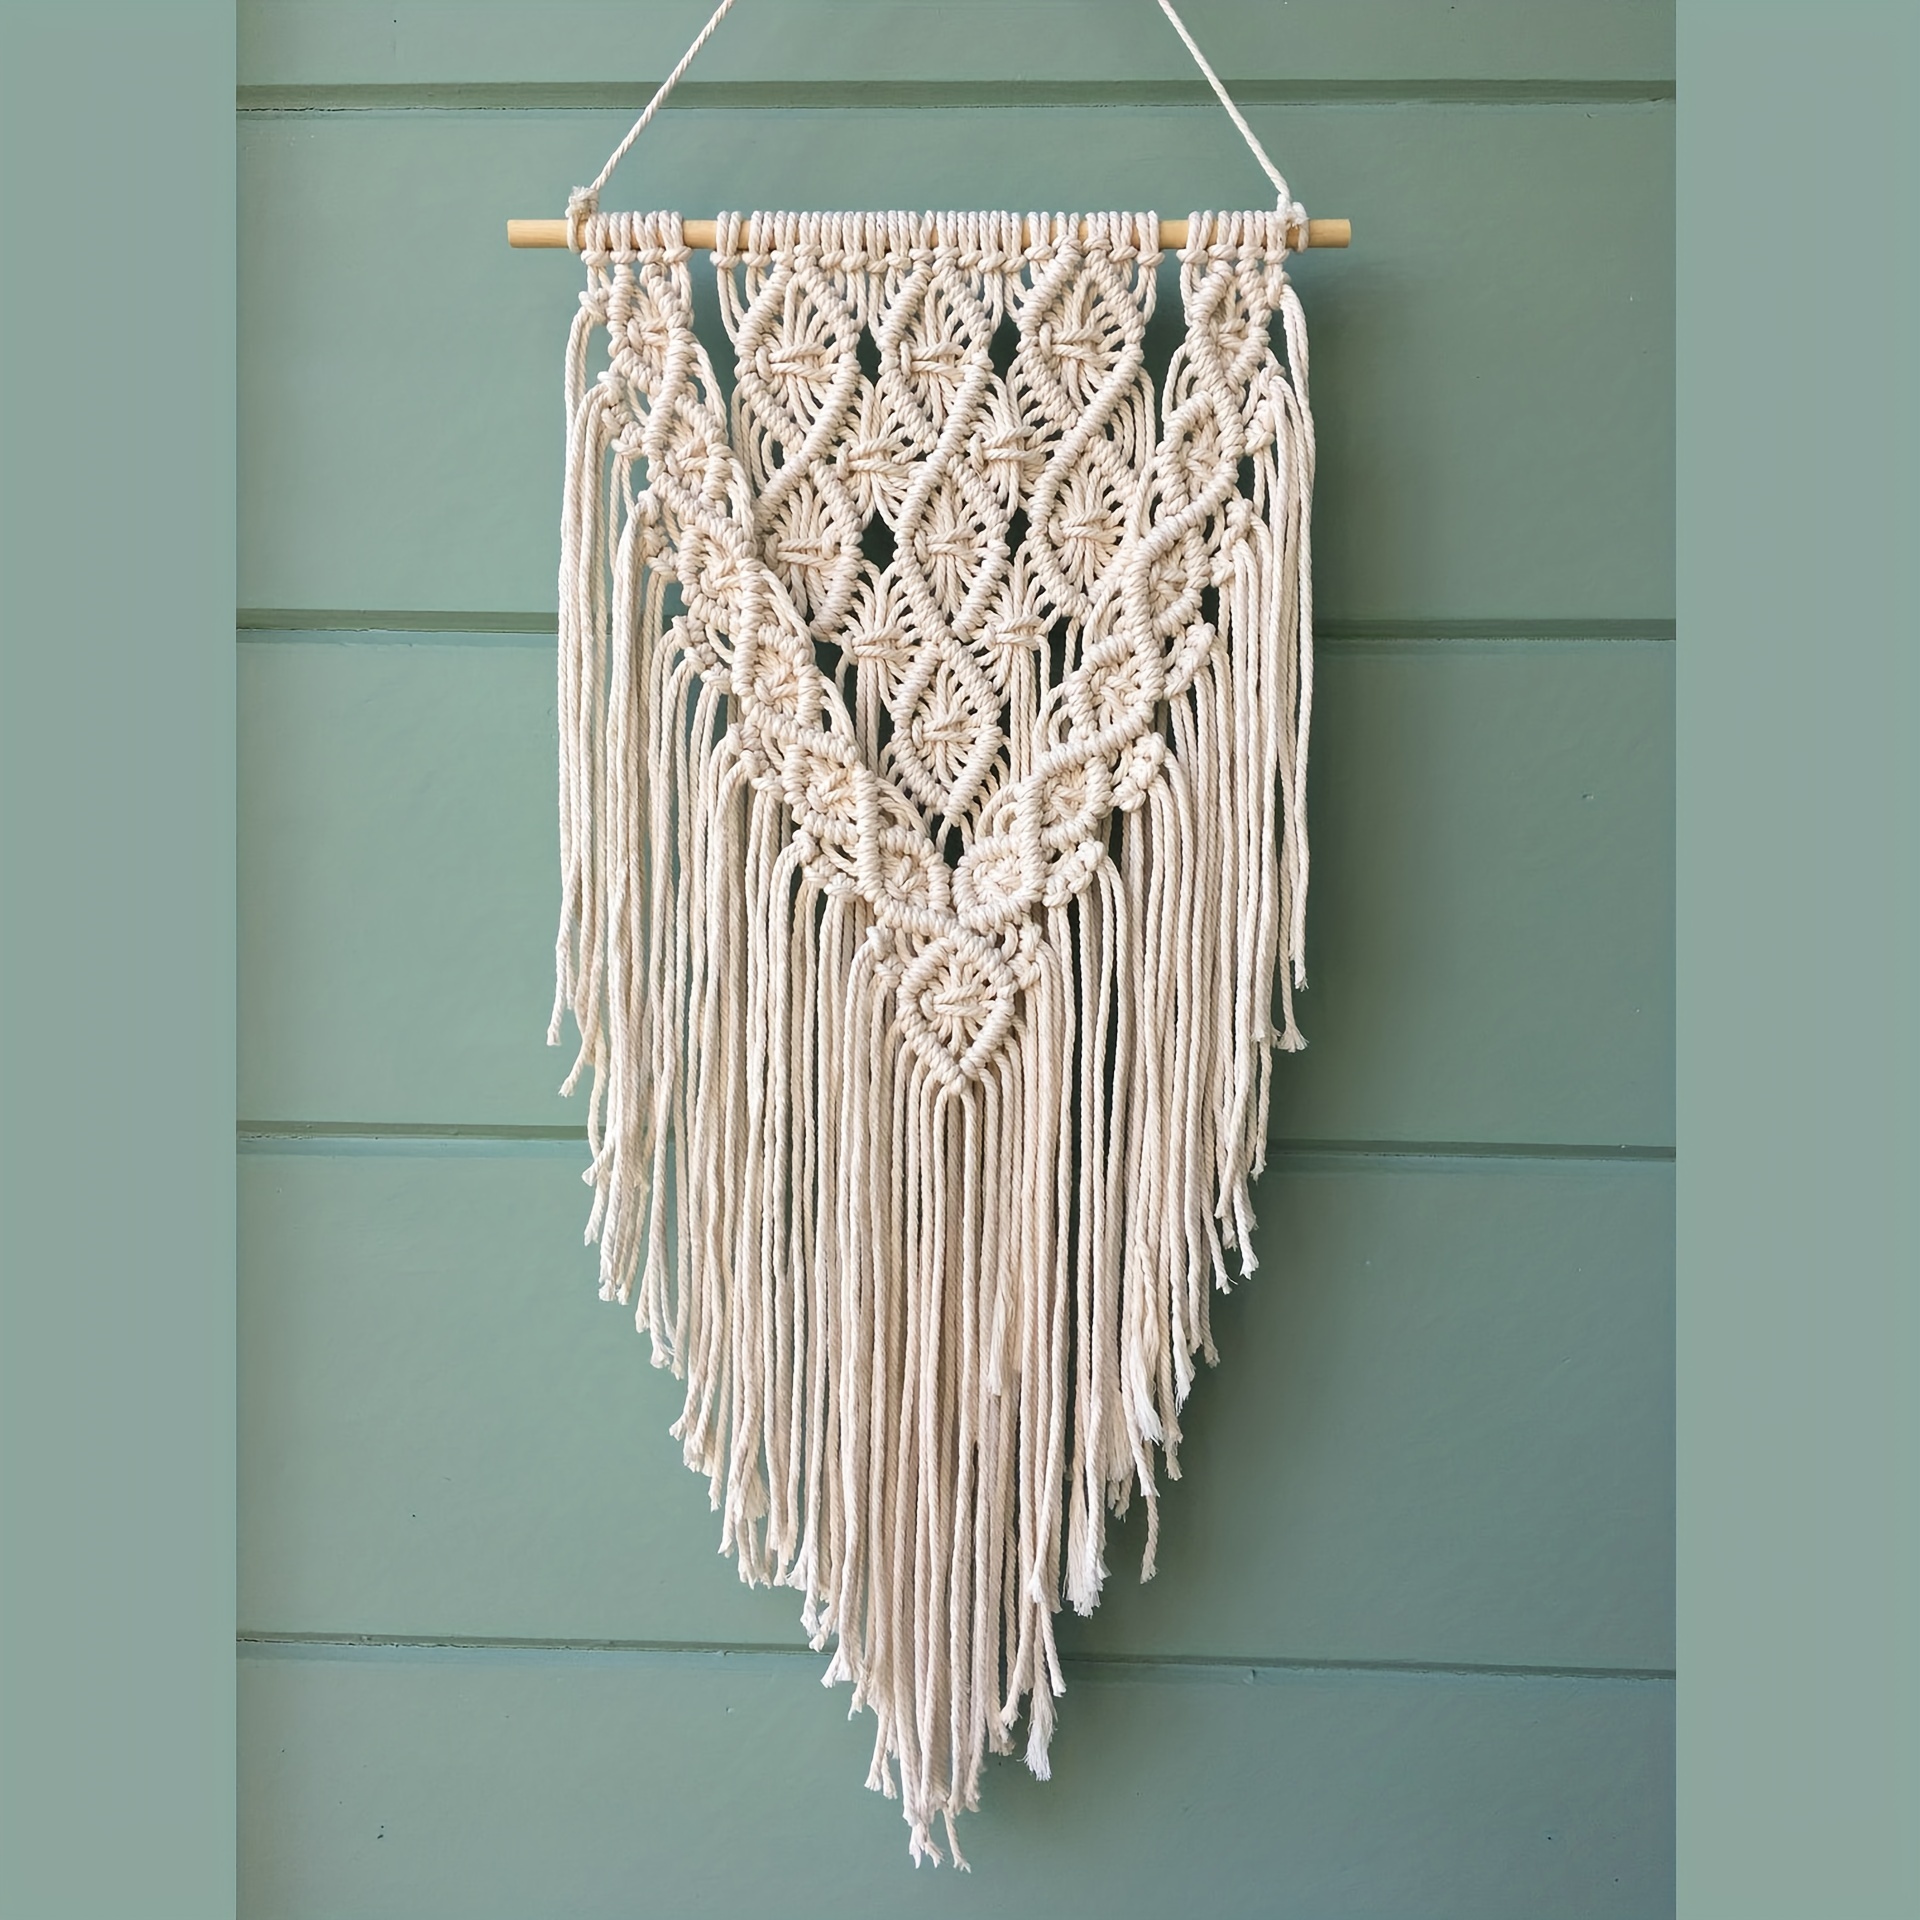 Macrame Kits for Adults Beginners，DIY Macrame Kit Macrame Wall Hanging  Supplies，Includes Macrame Cord, Moon Pendant and Instruction with Video,  Craft